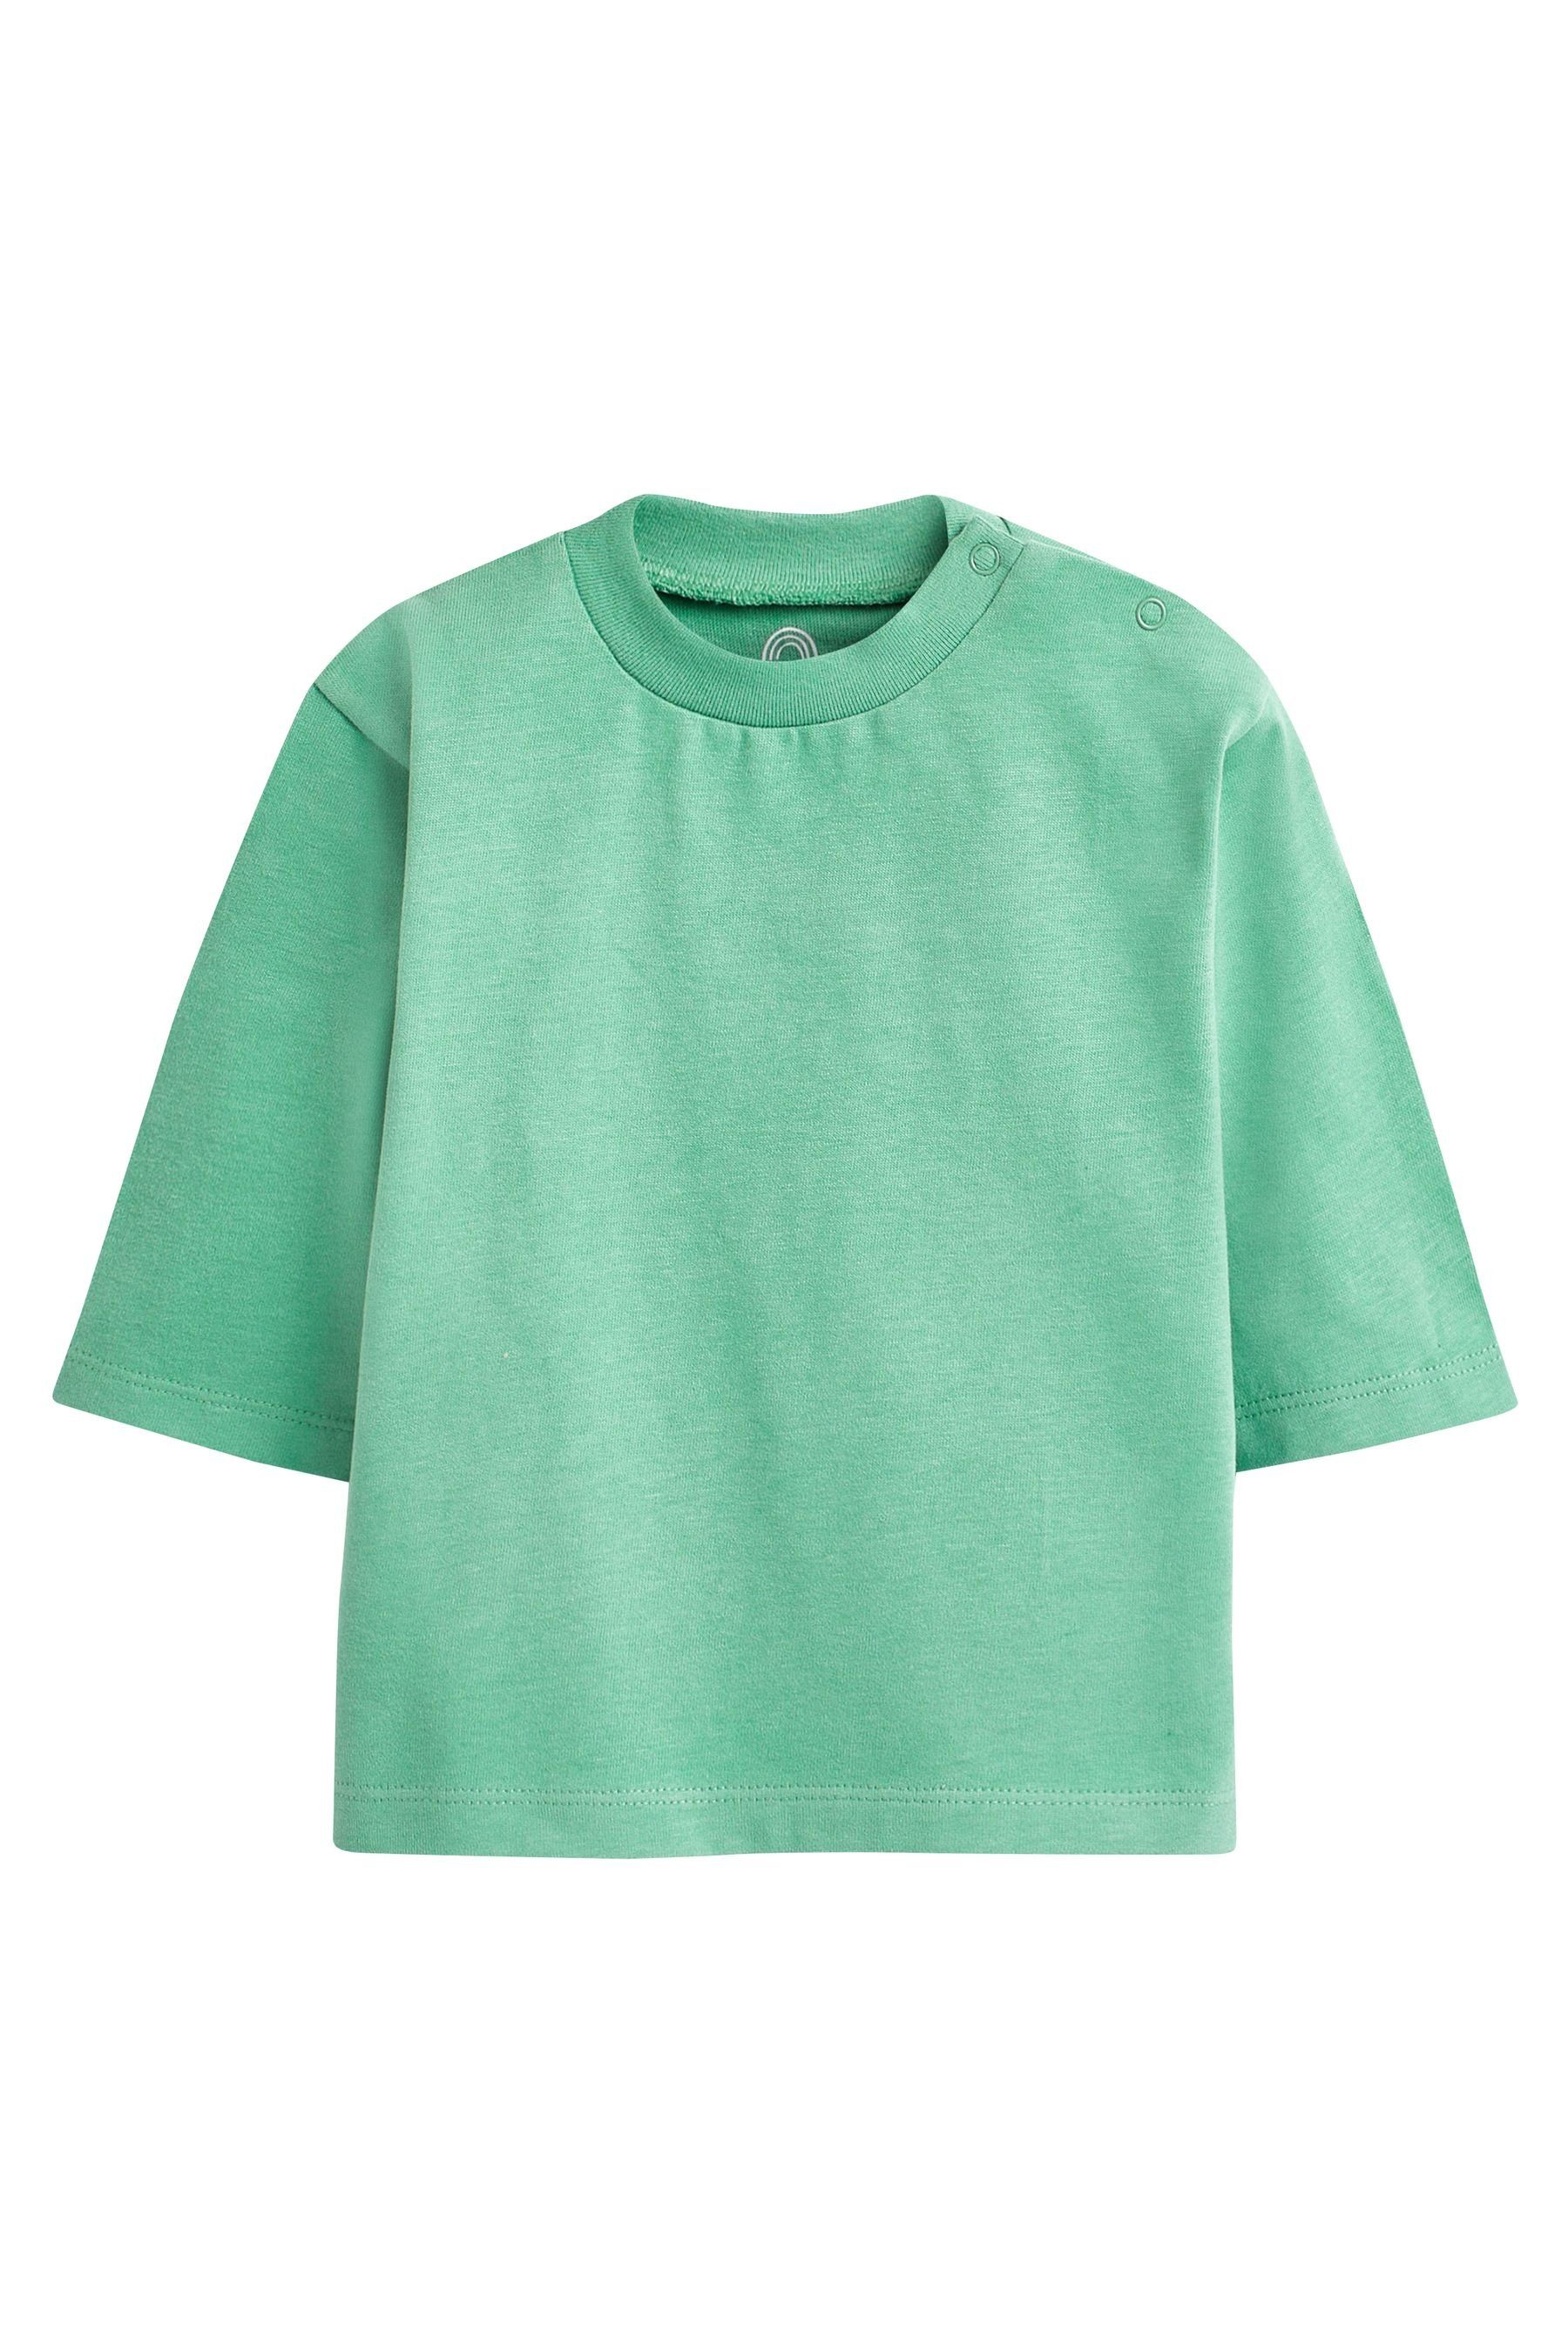 Relaxed Next Bright Langarmshirt langärmelige 4er-Pack (4-tlg) Baby-T-Shirts Fit